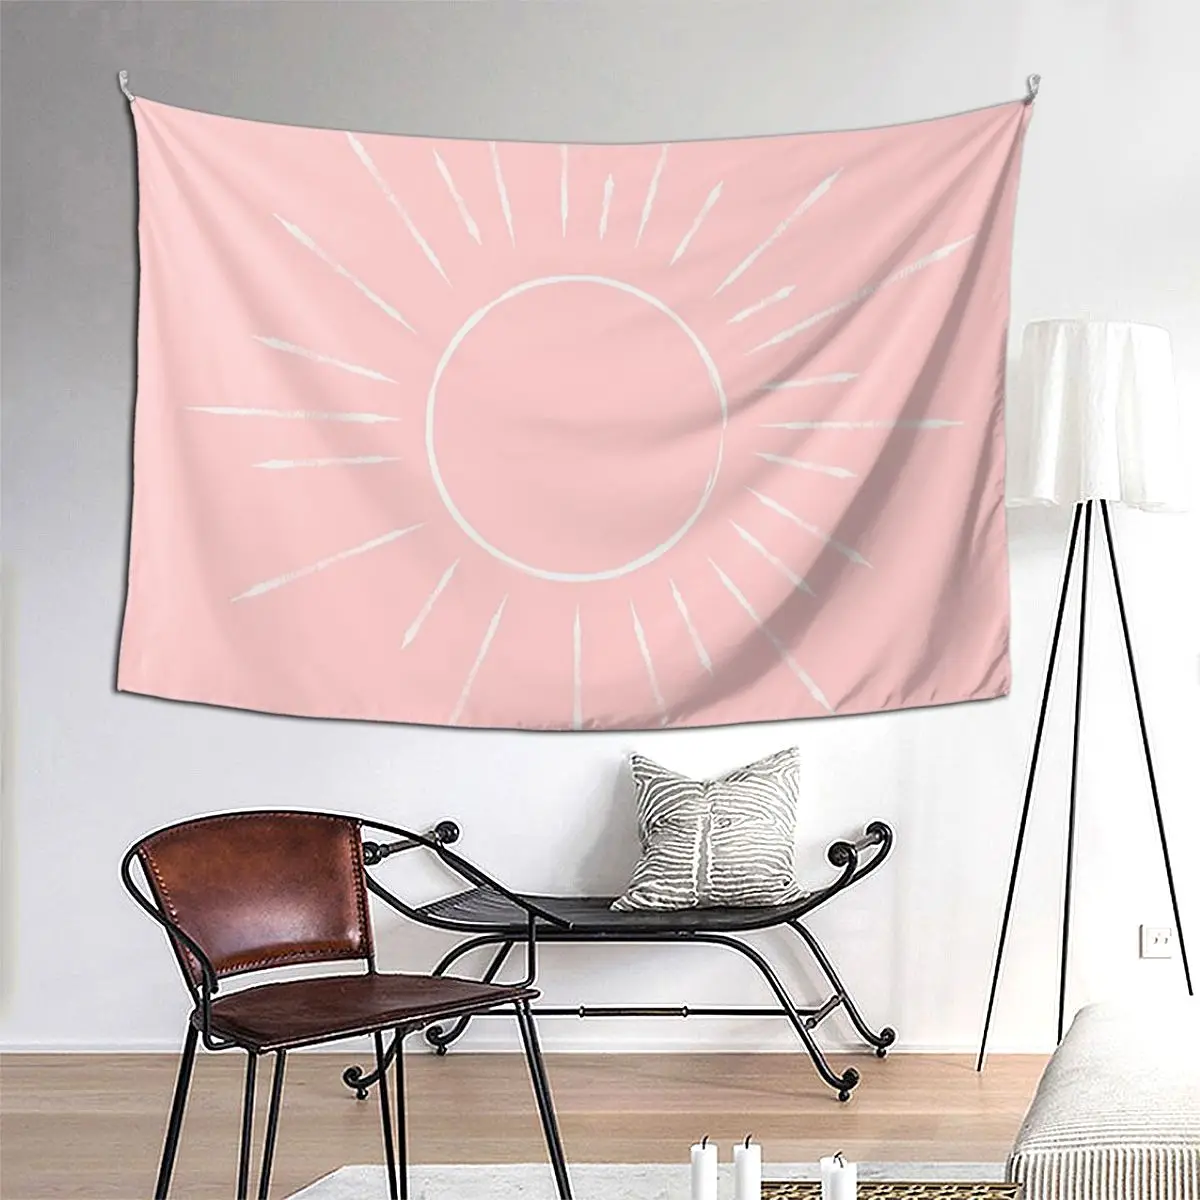 

Sunshine On My Mind Pink Tapestry Hippie Wall Hanging Aesthetic Home Decoration Tapestries for Living Room Bedroom Dorm Room